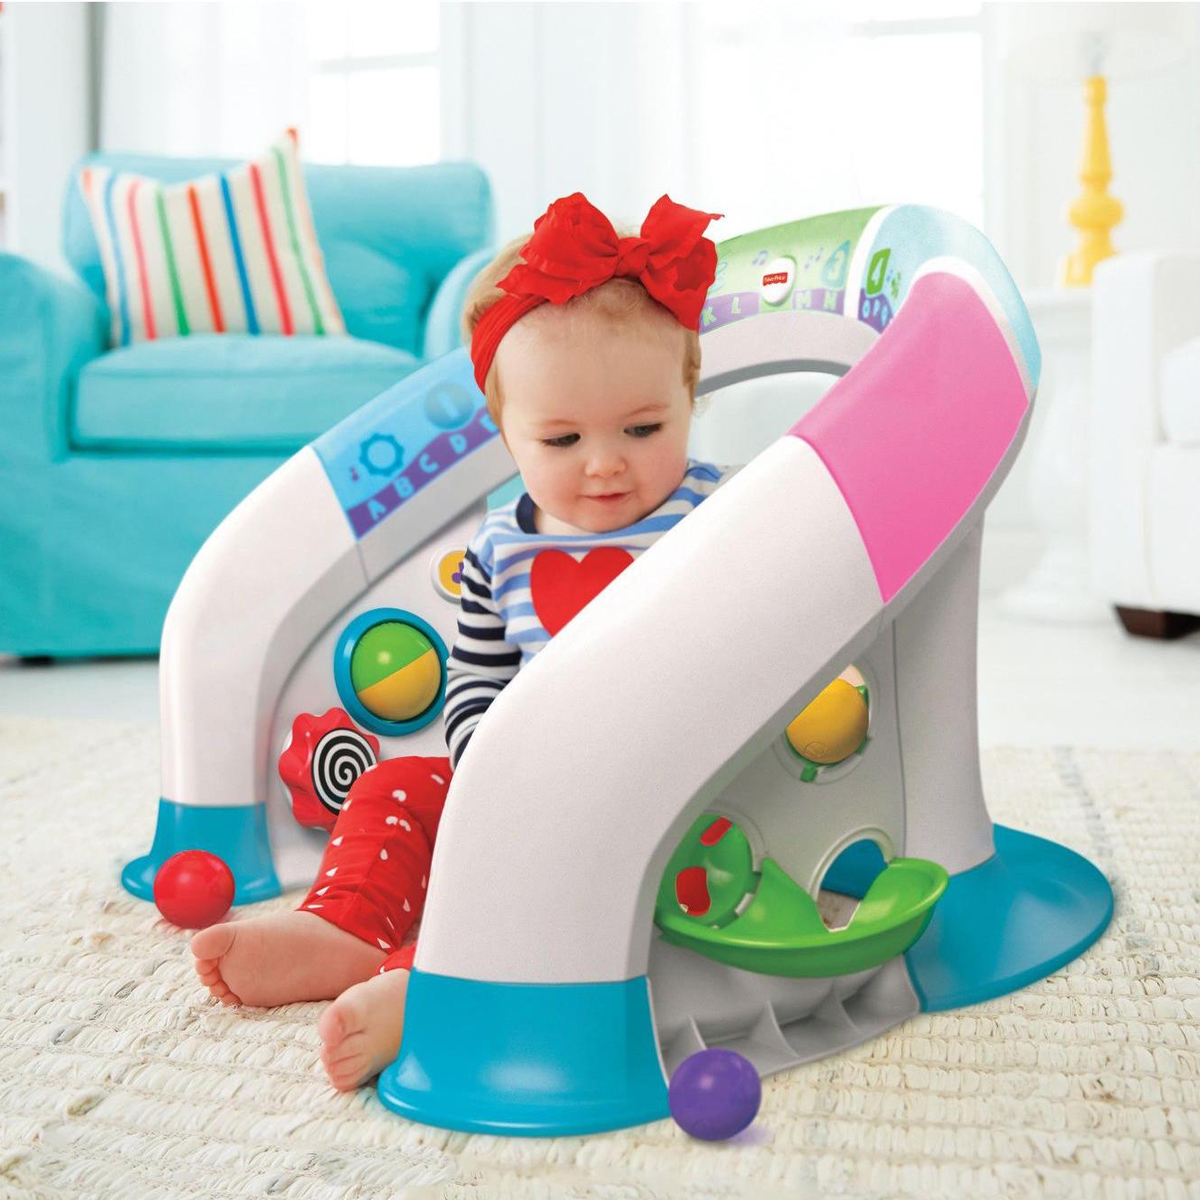 fisher price touch smart play space